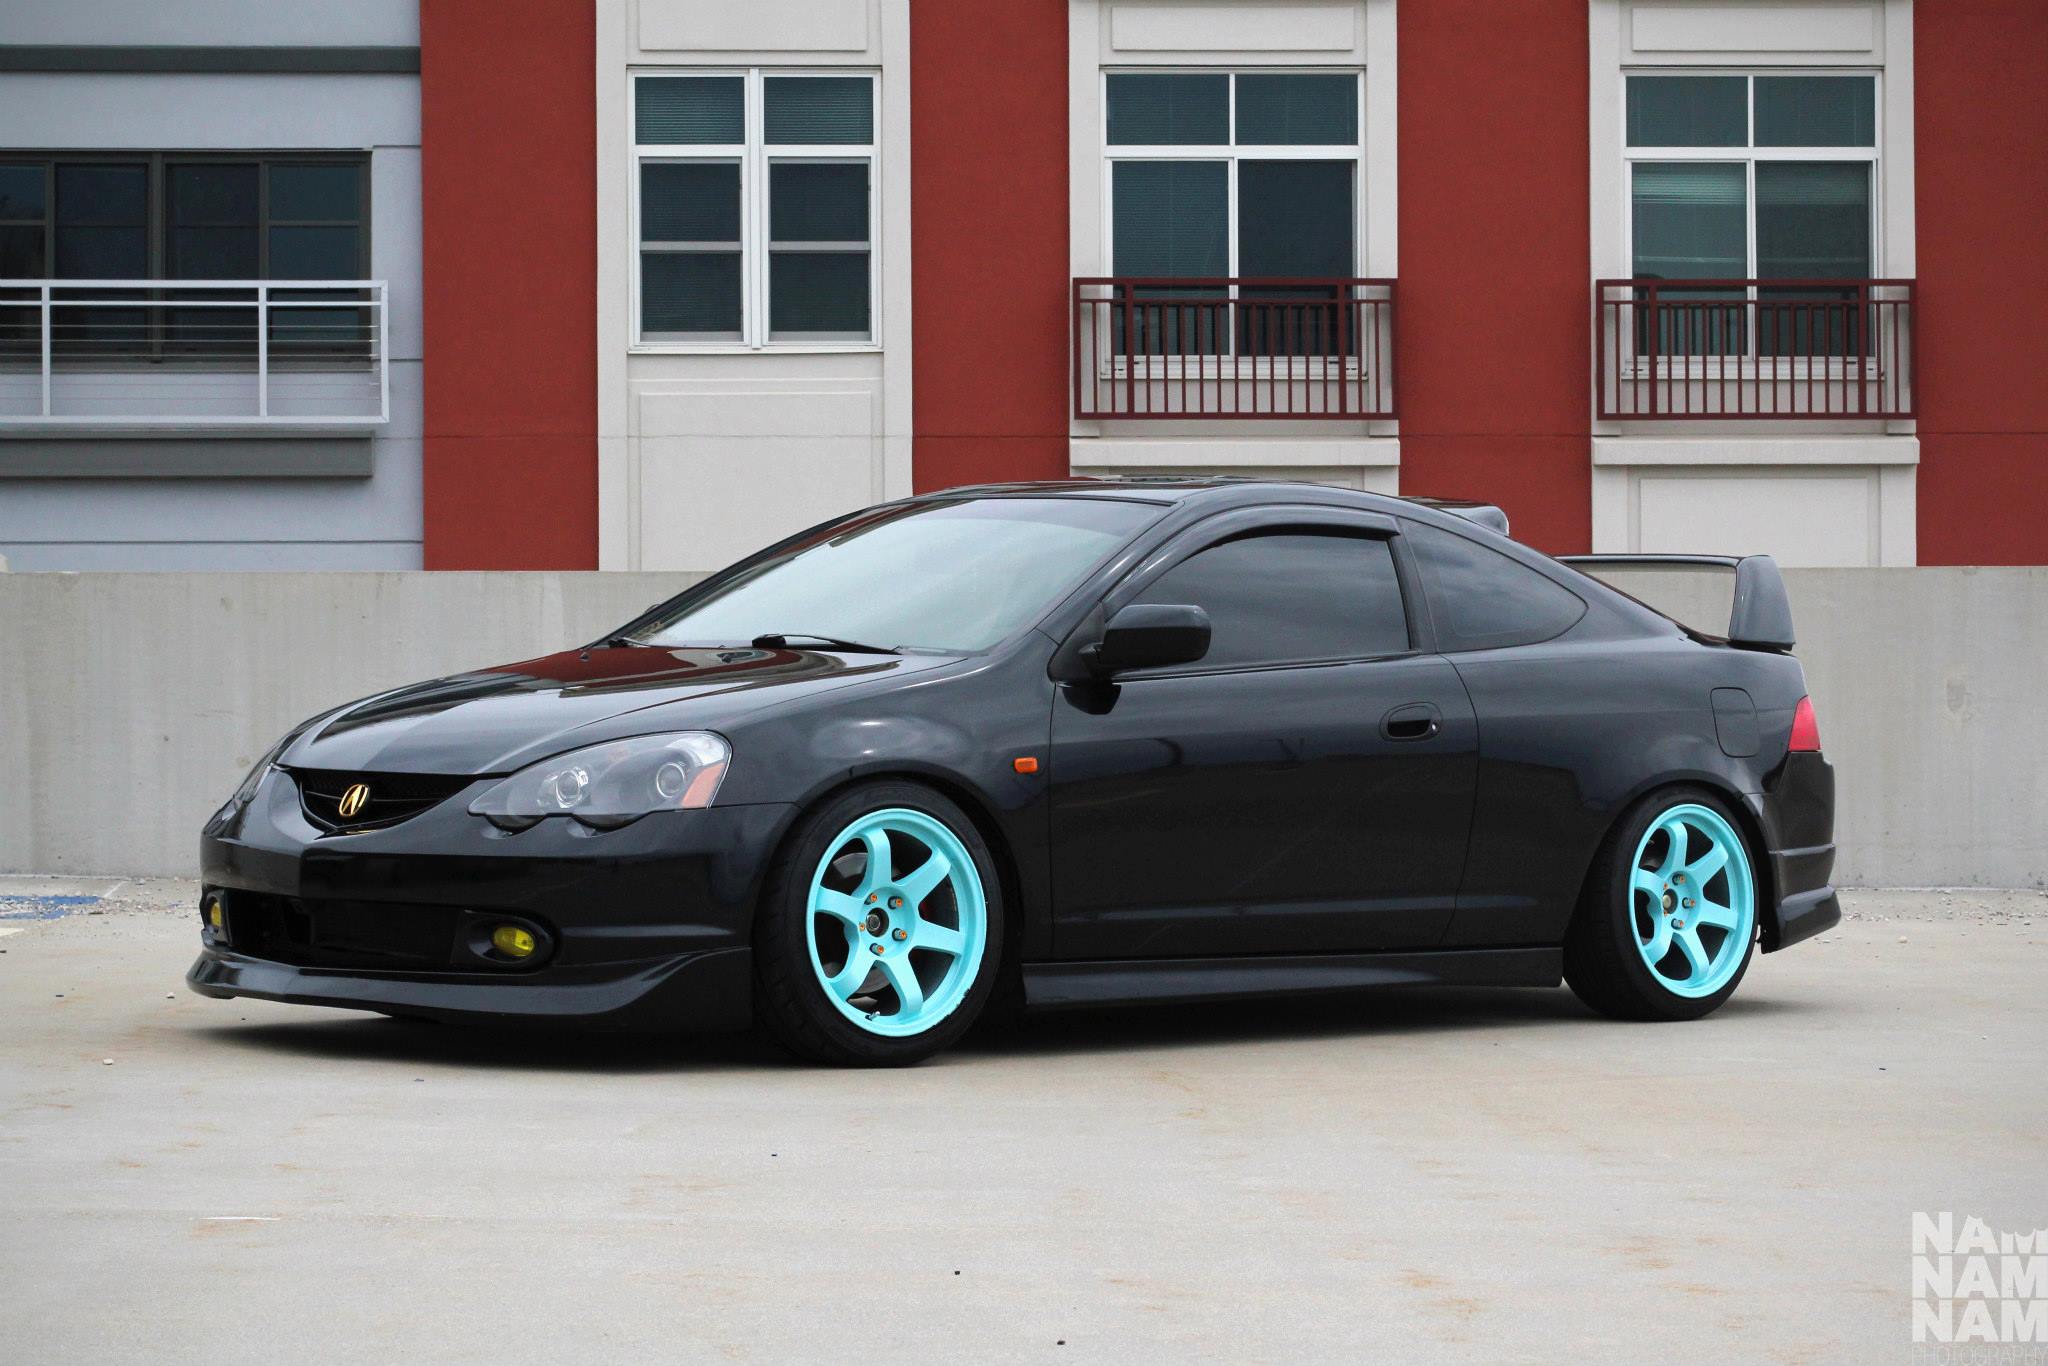 Stanced and supercharged Rsx